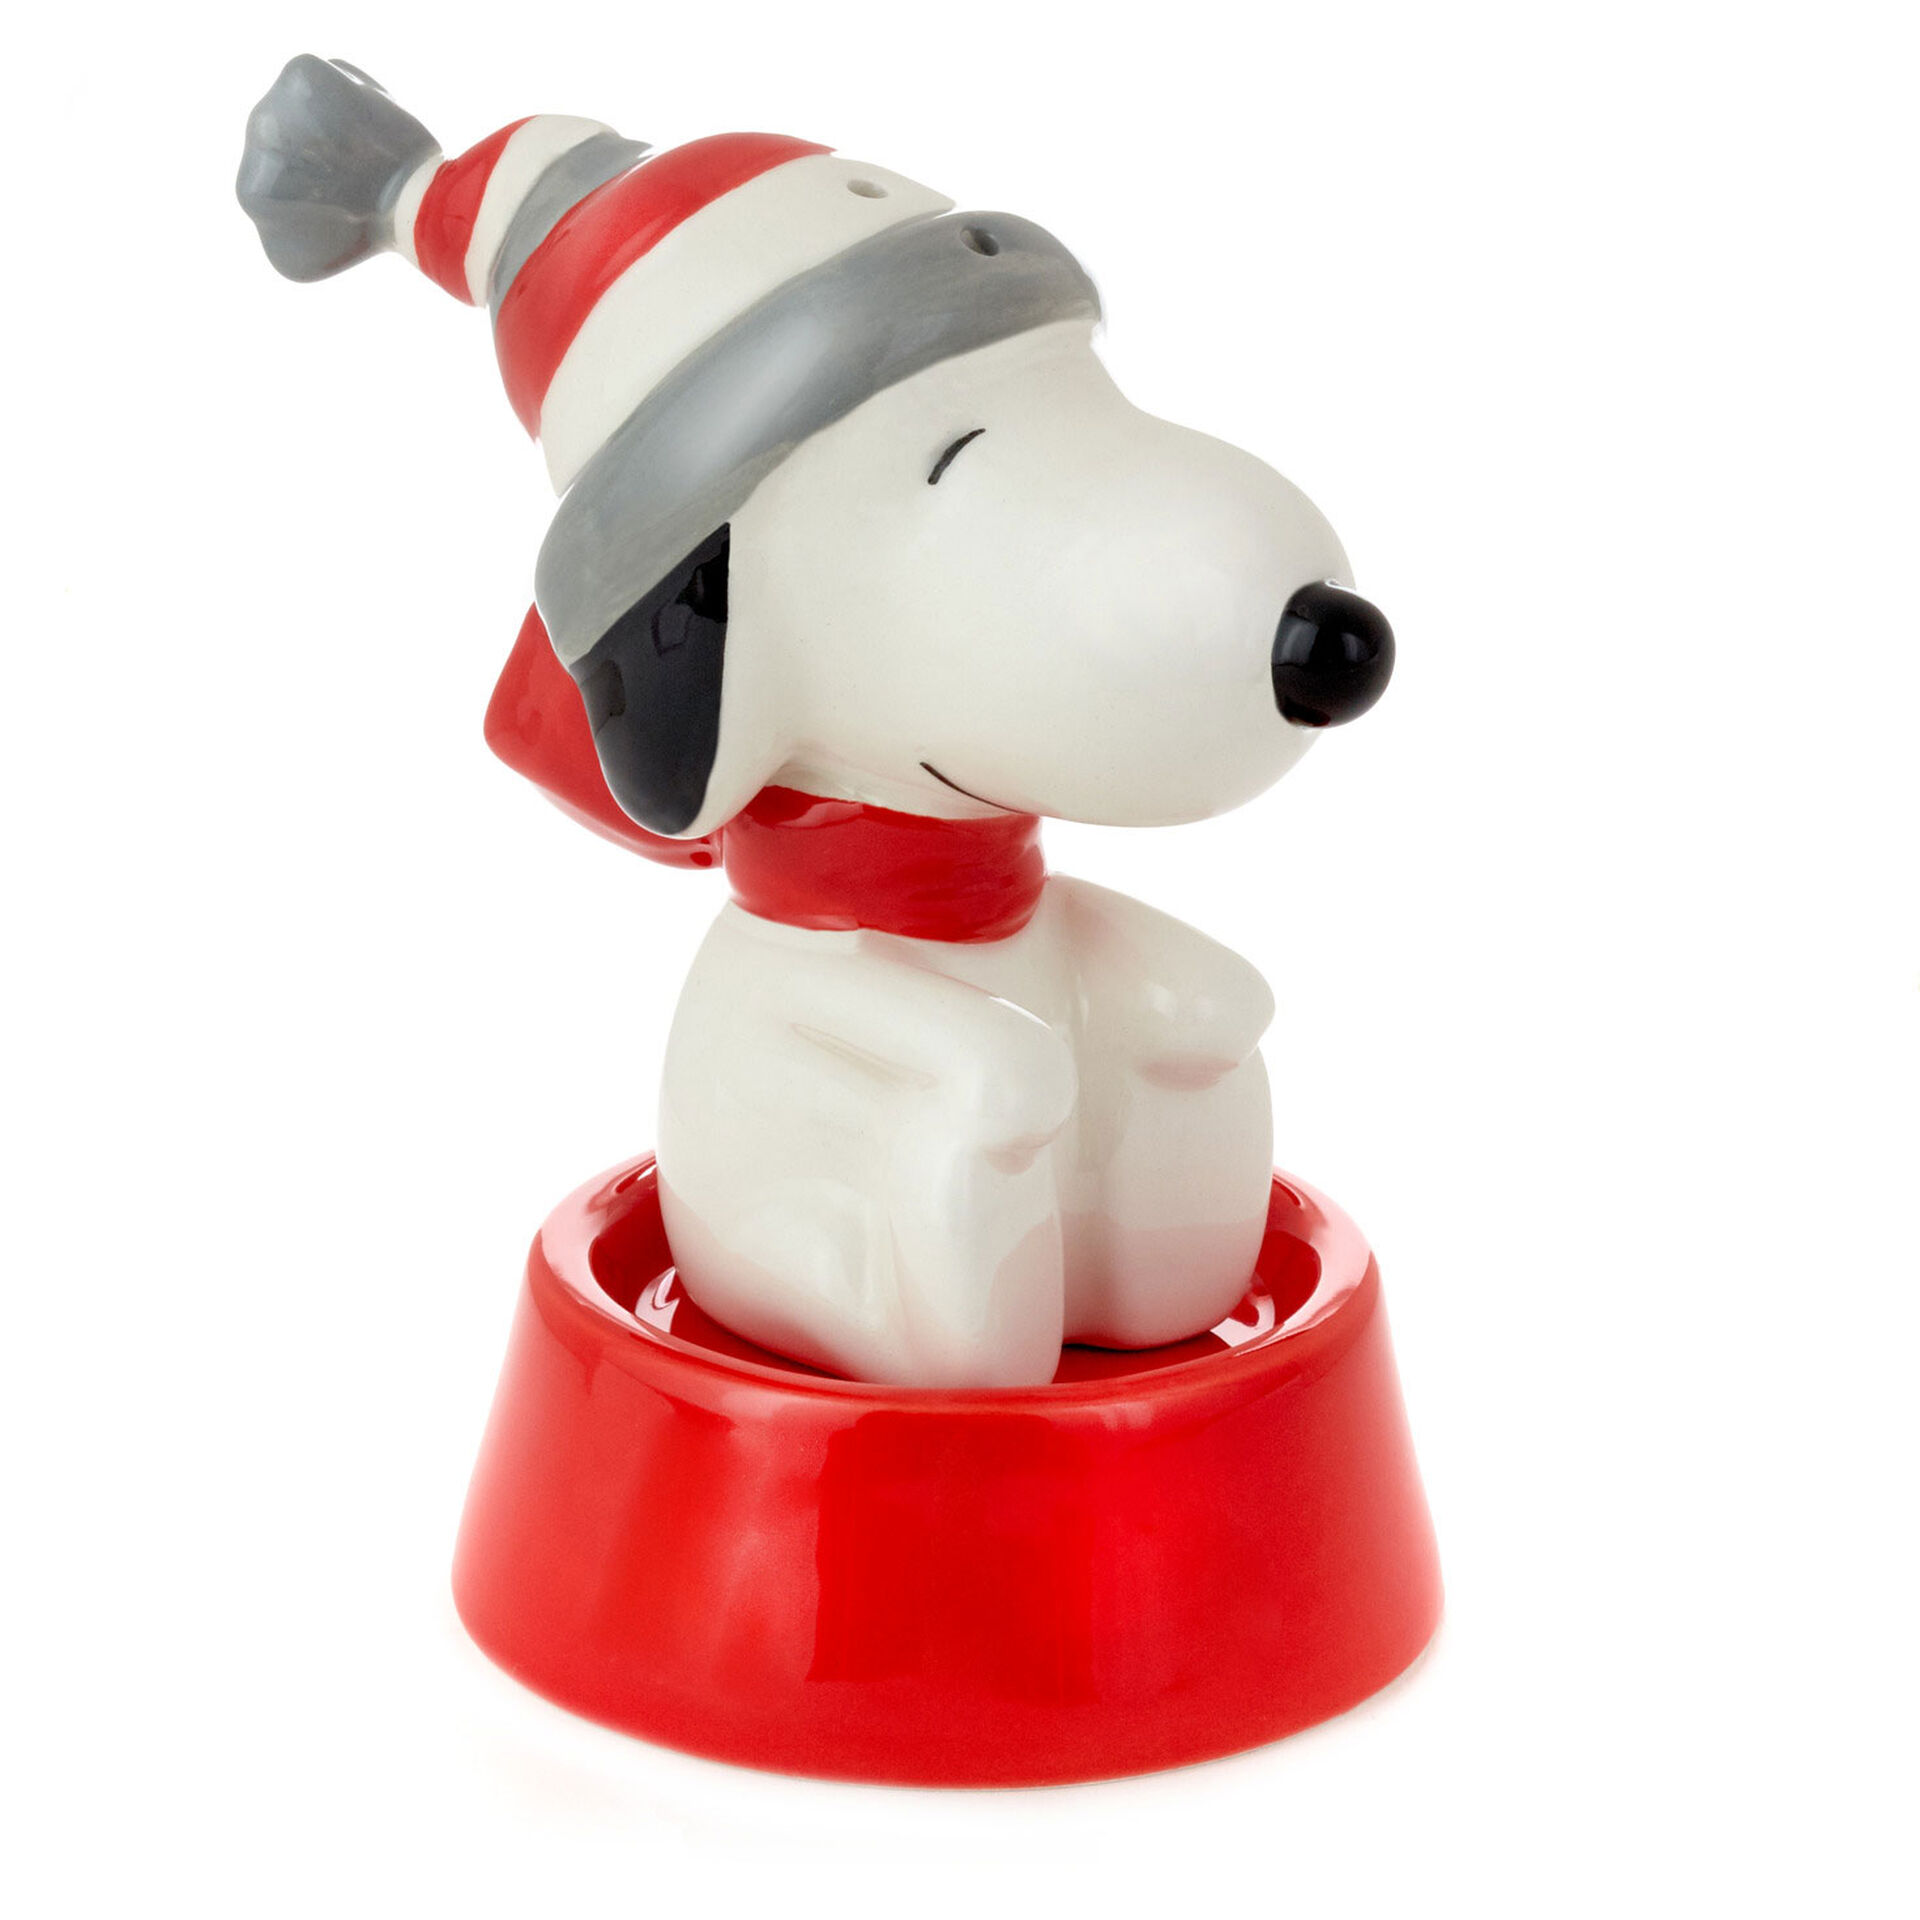 was snoopy based on a real dog